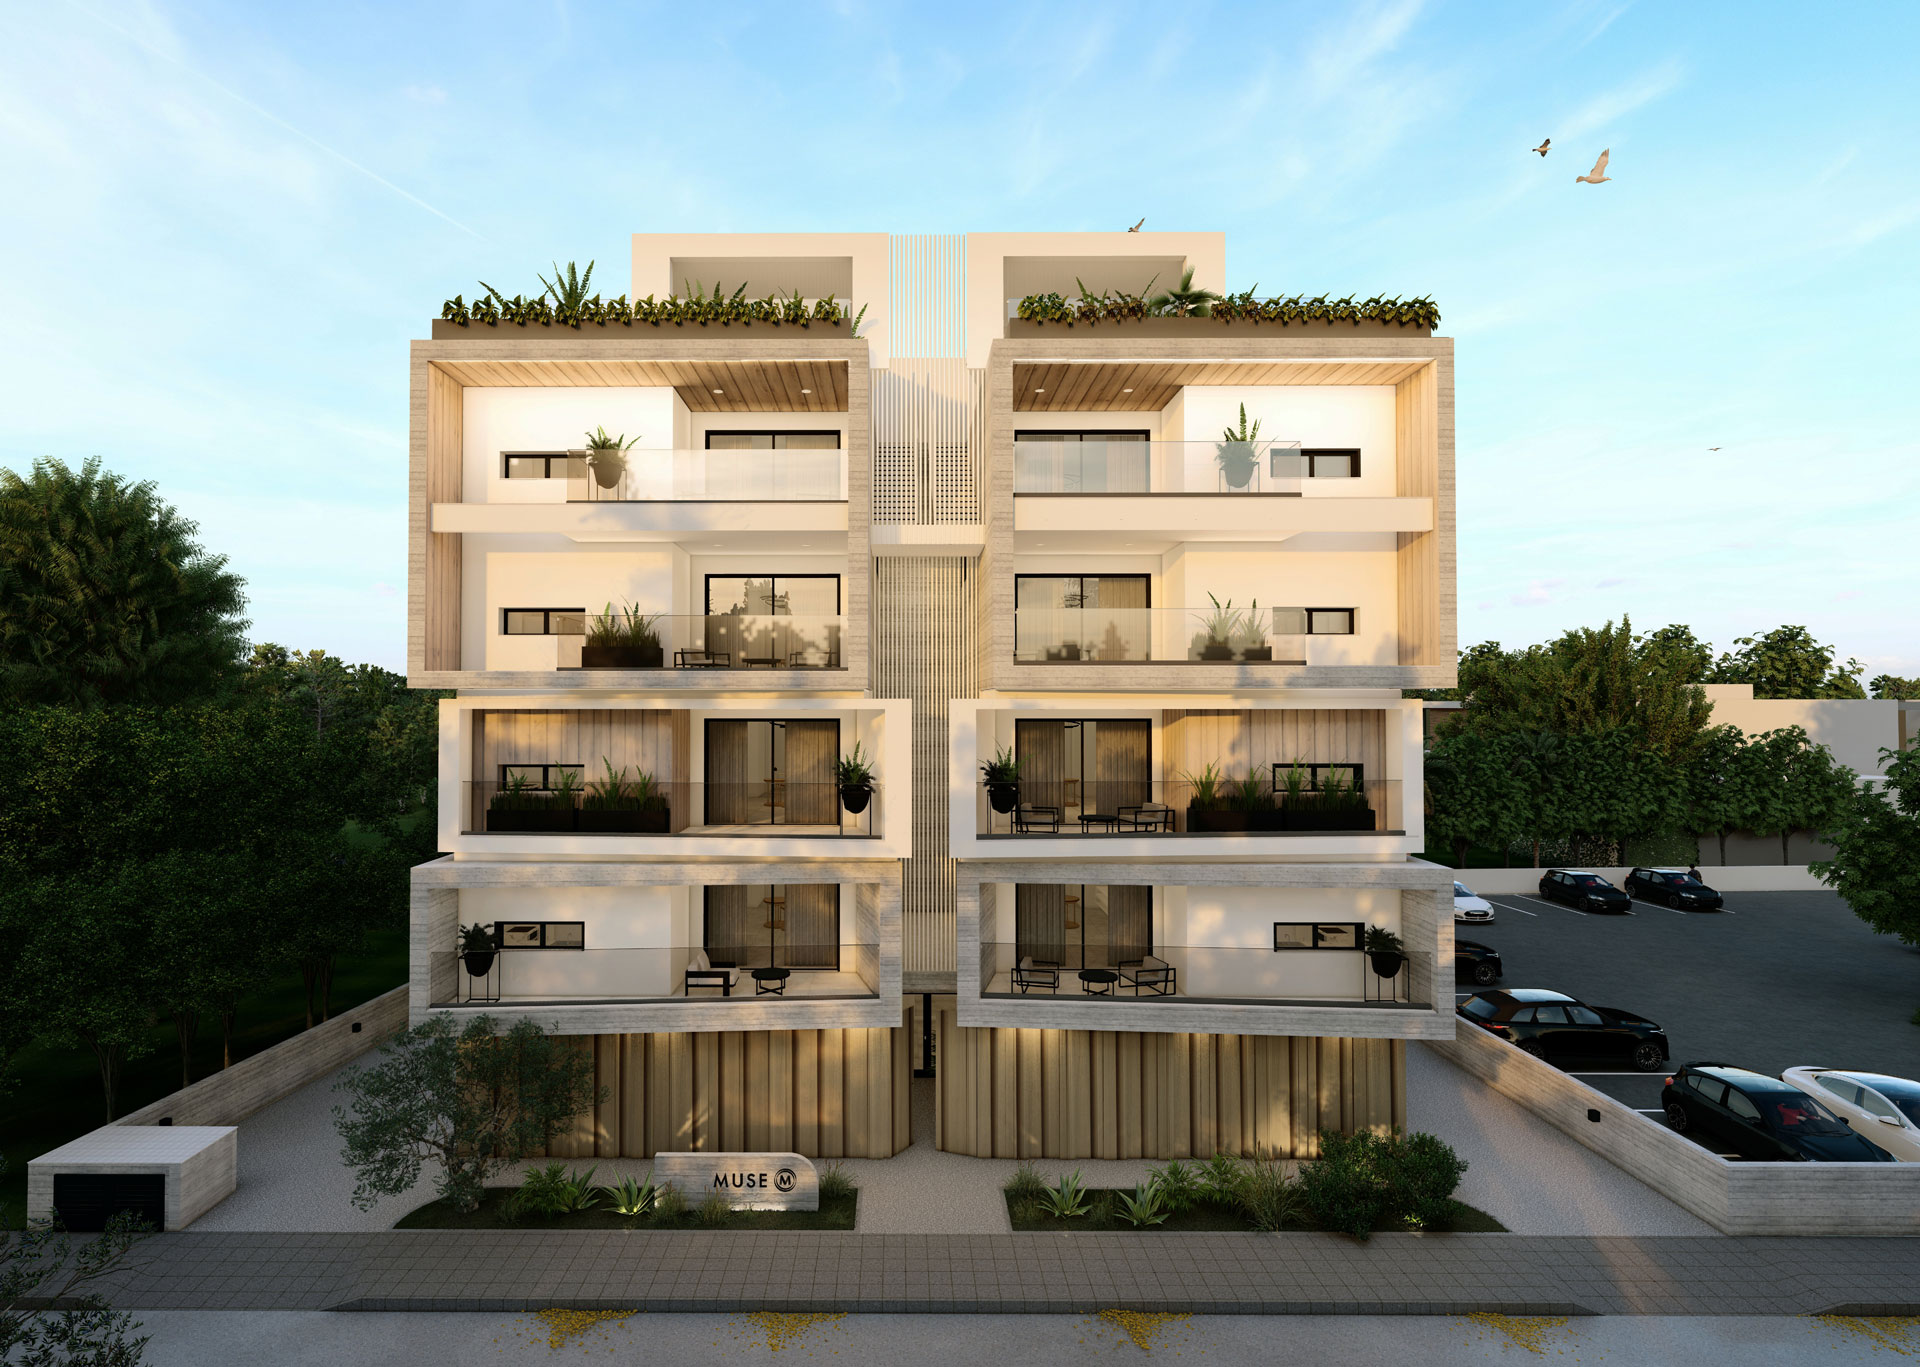 1 Bedroom Apartment for Sale in Limassol – Agia Zoni